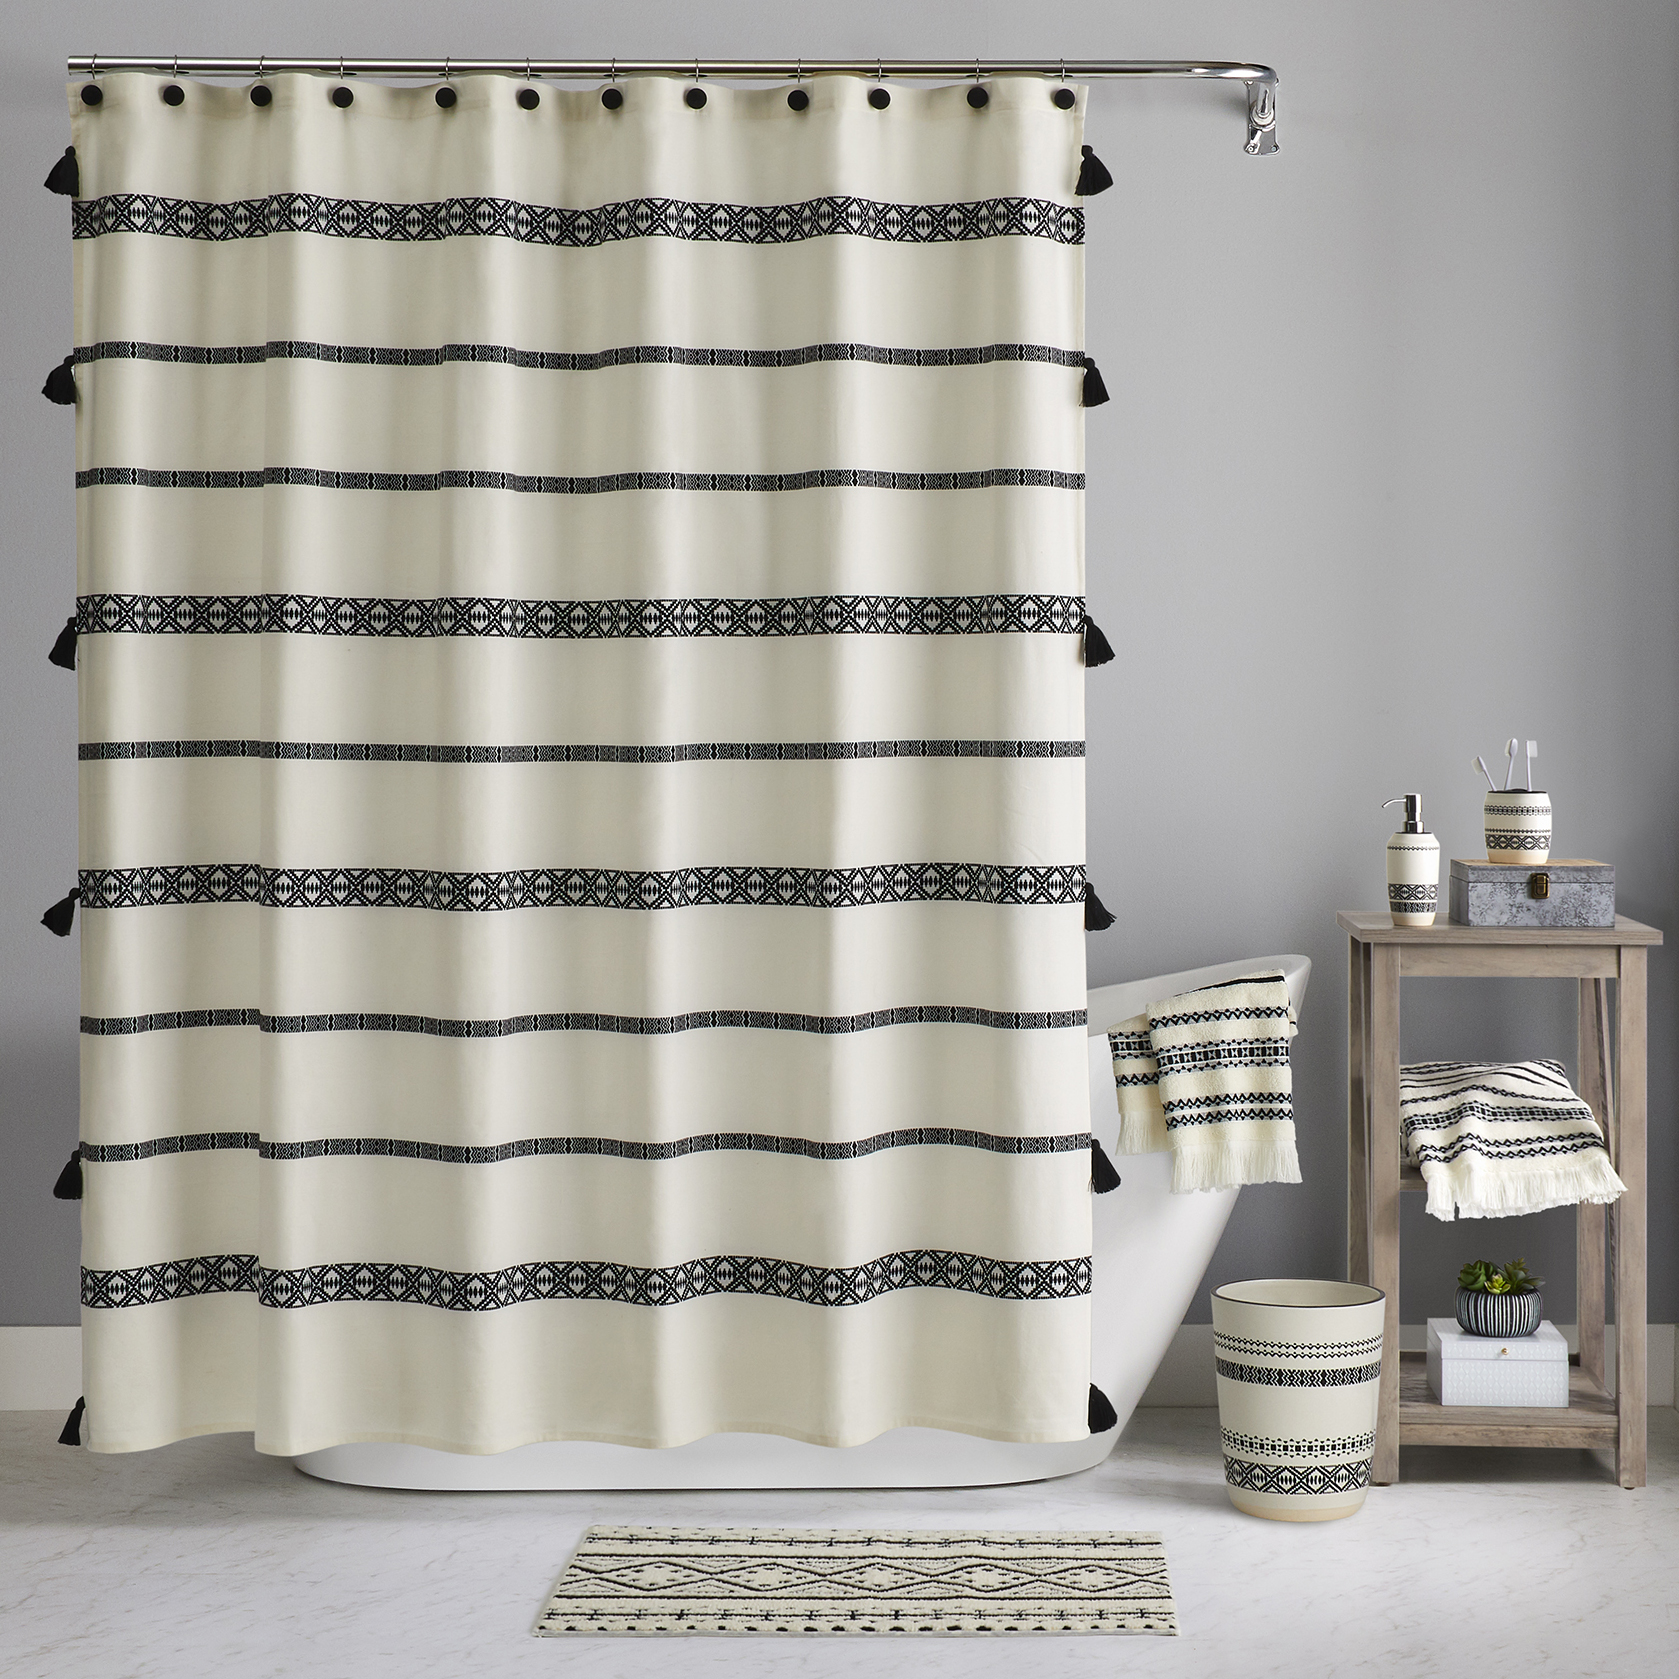 Boho Chic Polyester and Cotton Shower Curtain, Black, Better Homes & Gardens, 72" x 72" - image 1 of 9